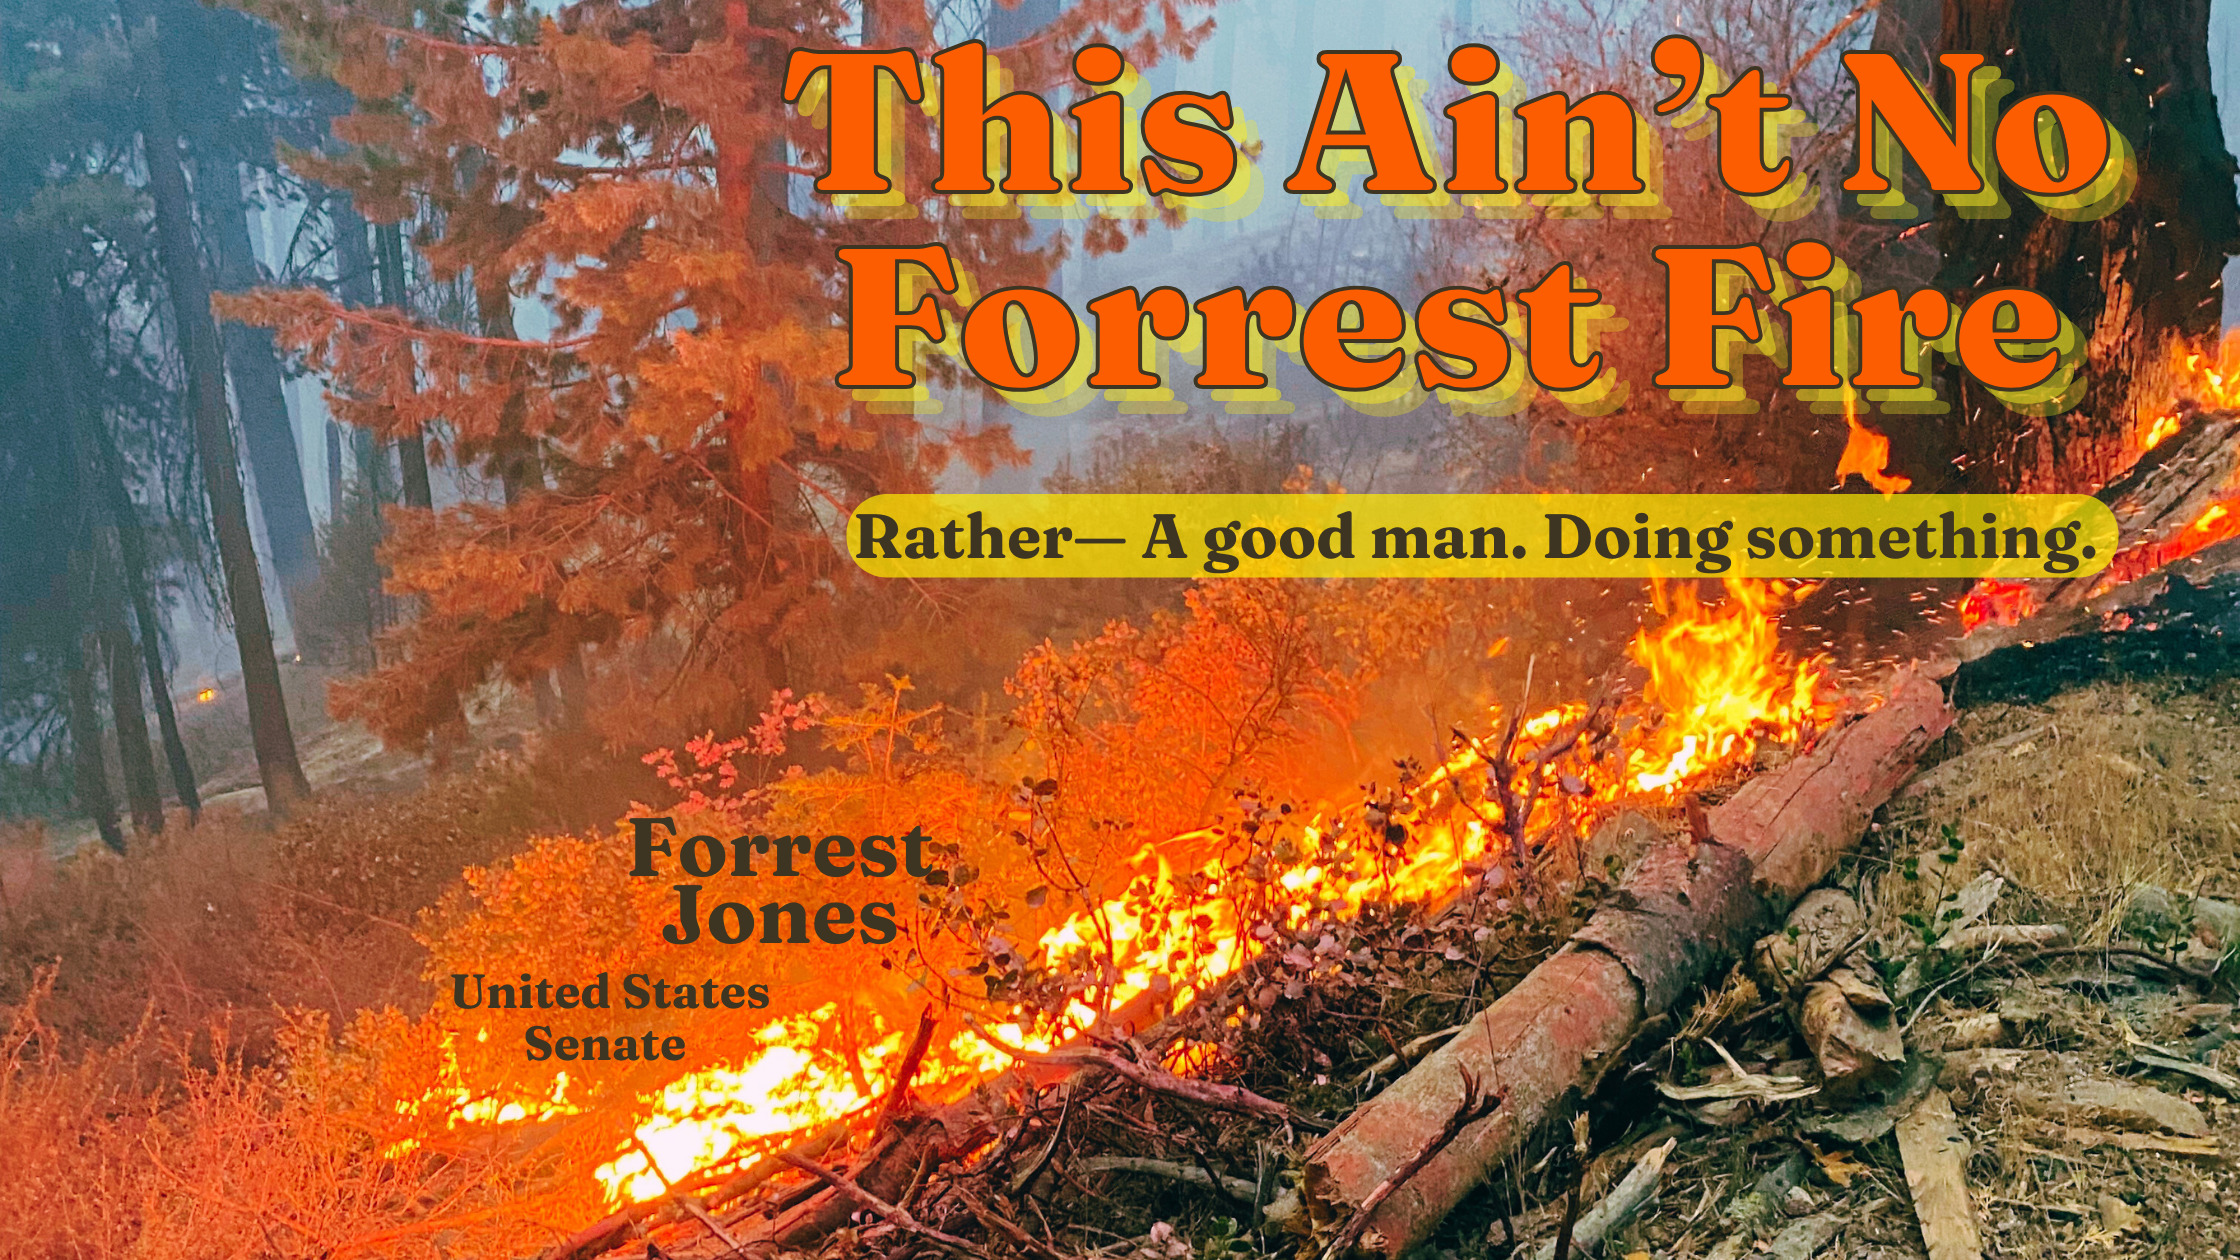 Image of an active forest fire. Title text on image reads "This ain't no Forrest fire". Other text reads "A good man. Doing Something." and "Forrest Jones United States Senate"